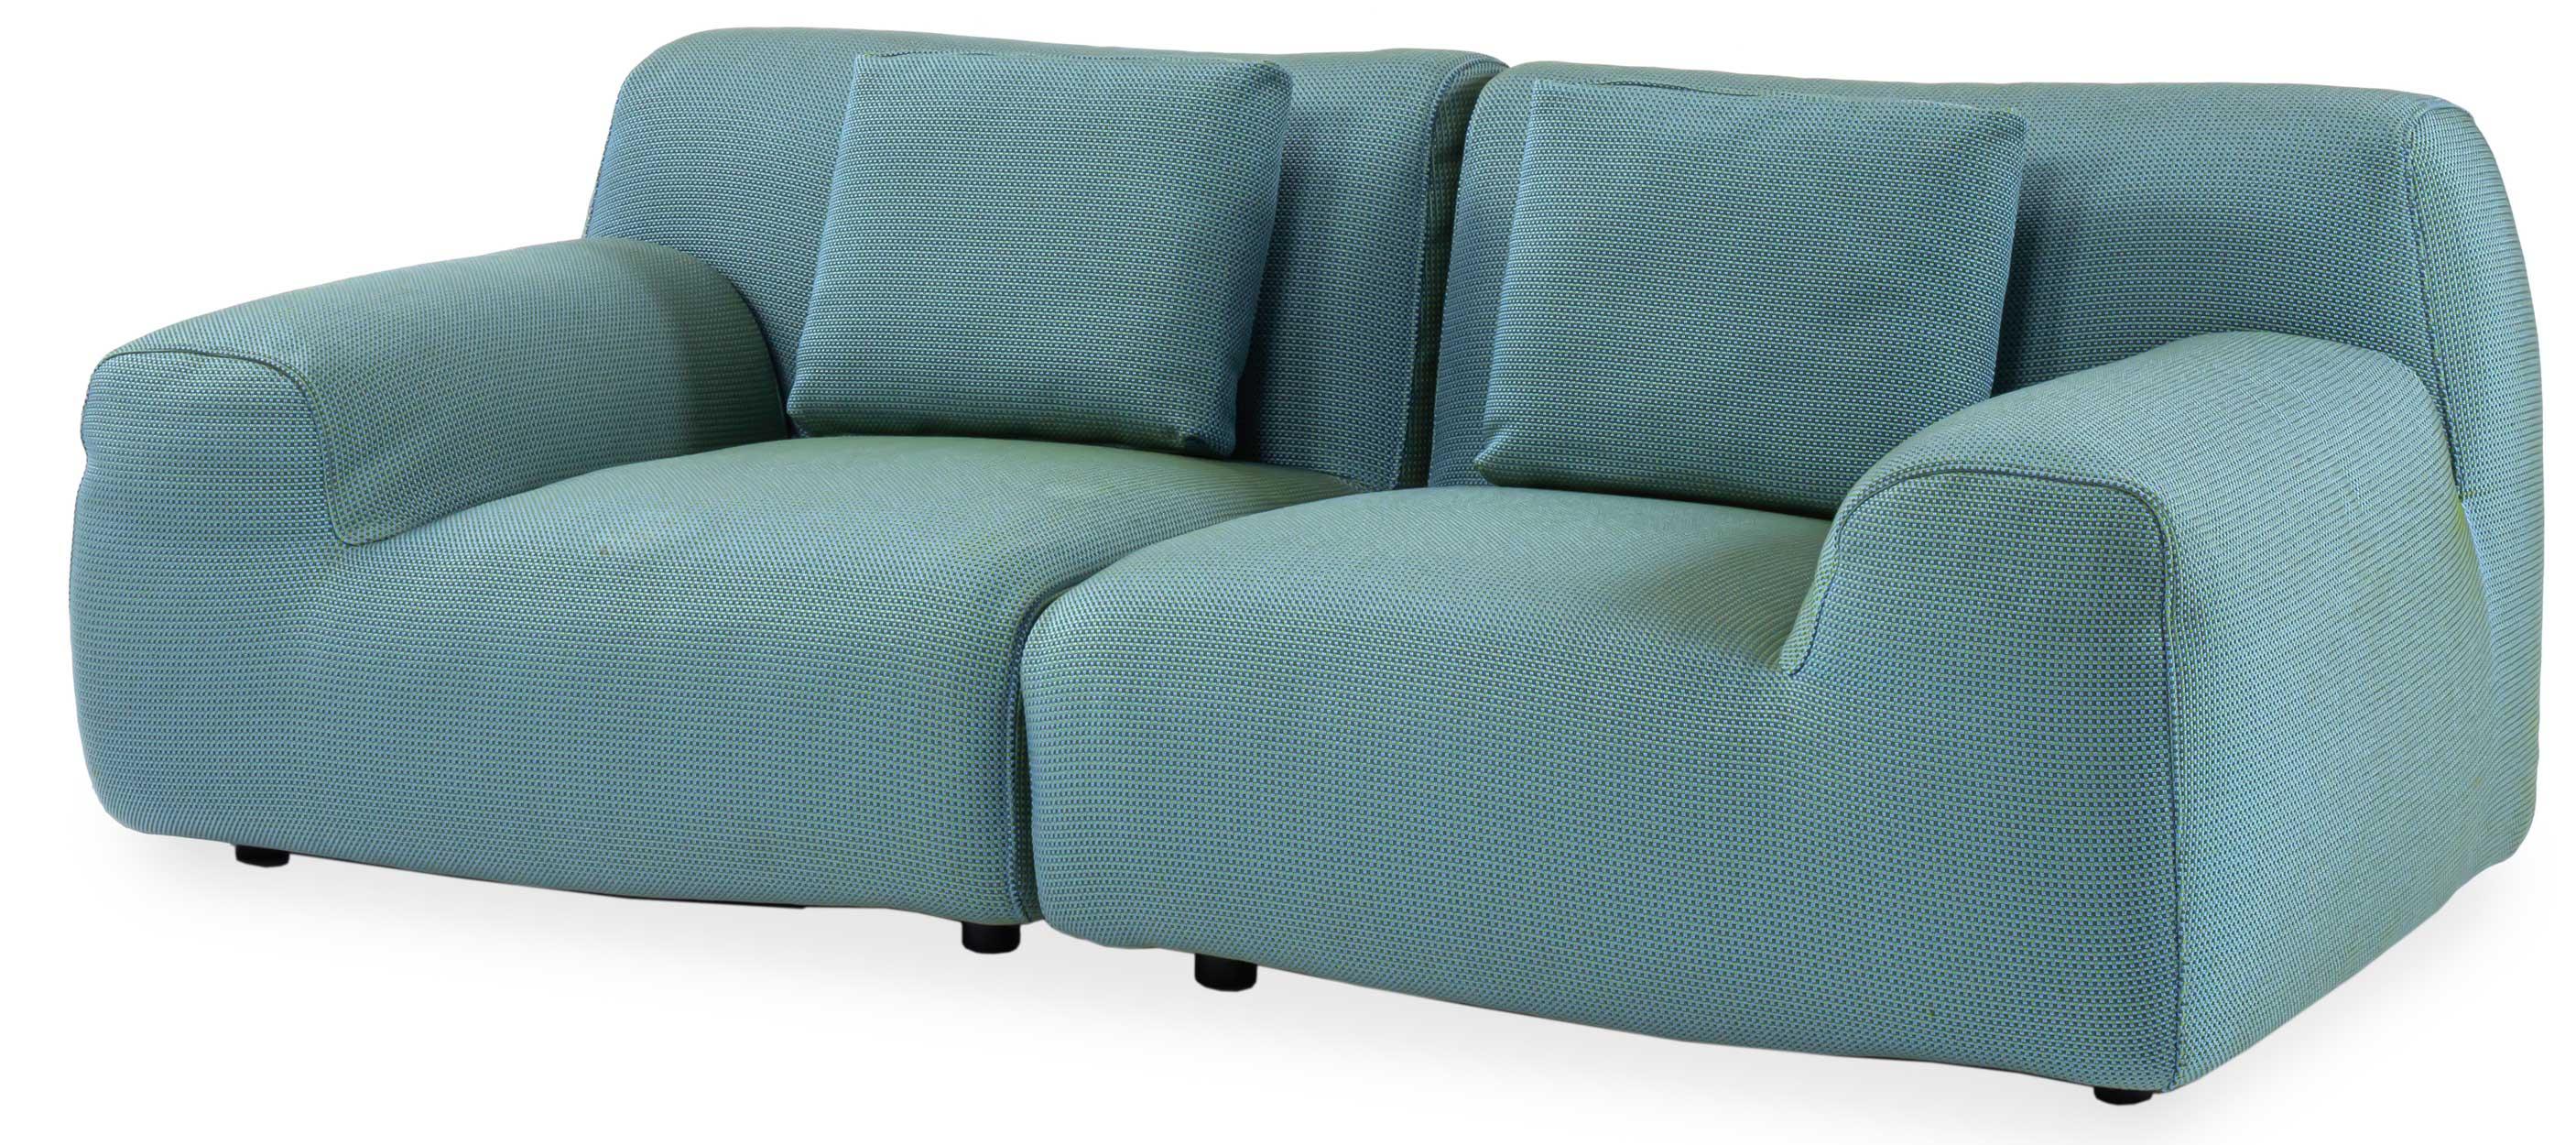 A four-component outdoor sectional set, two with armrest and two without, covered in a weather-safe mixed fabric in blue and green tones. Sectional features a metal base with a weather-safe finish. Sectional can be reconfigured for multiple seating